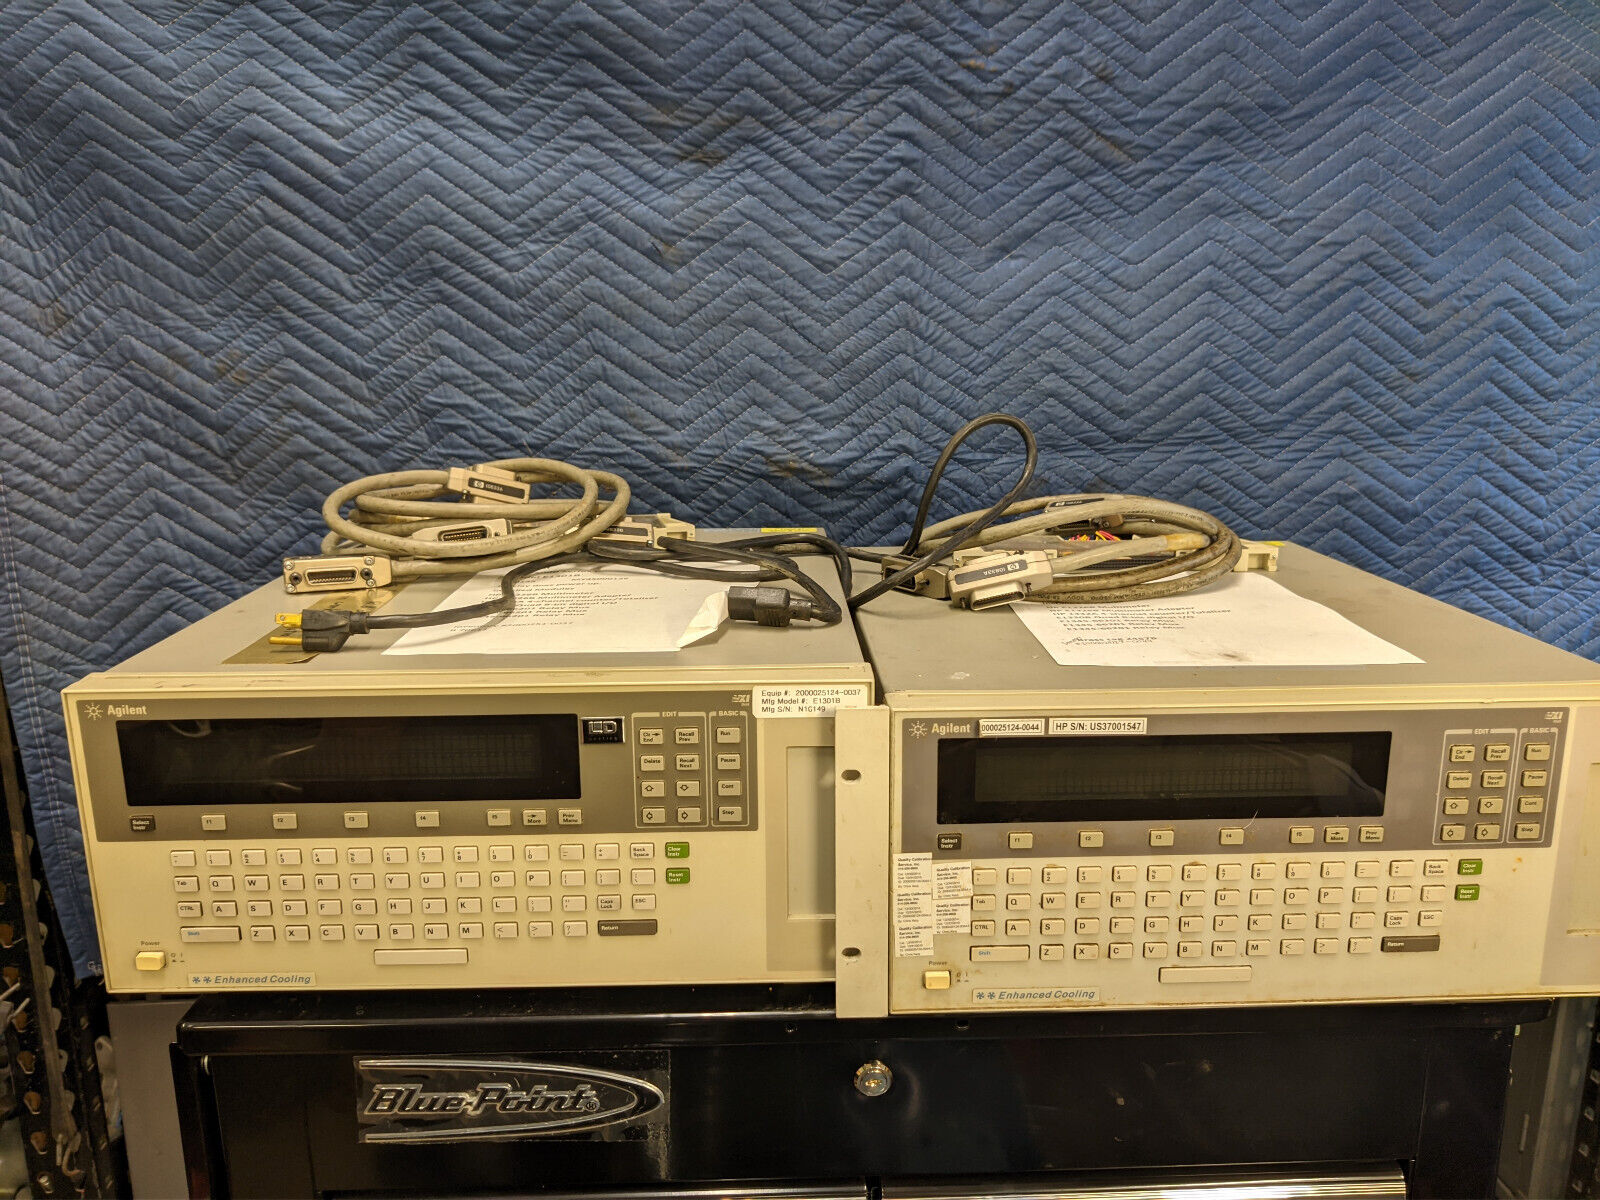 Agilent E1301B Mainframe  9-slots with multimeter, totalizer, and relay muxes